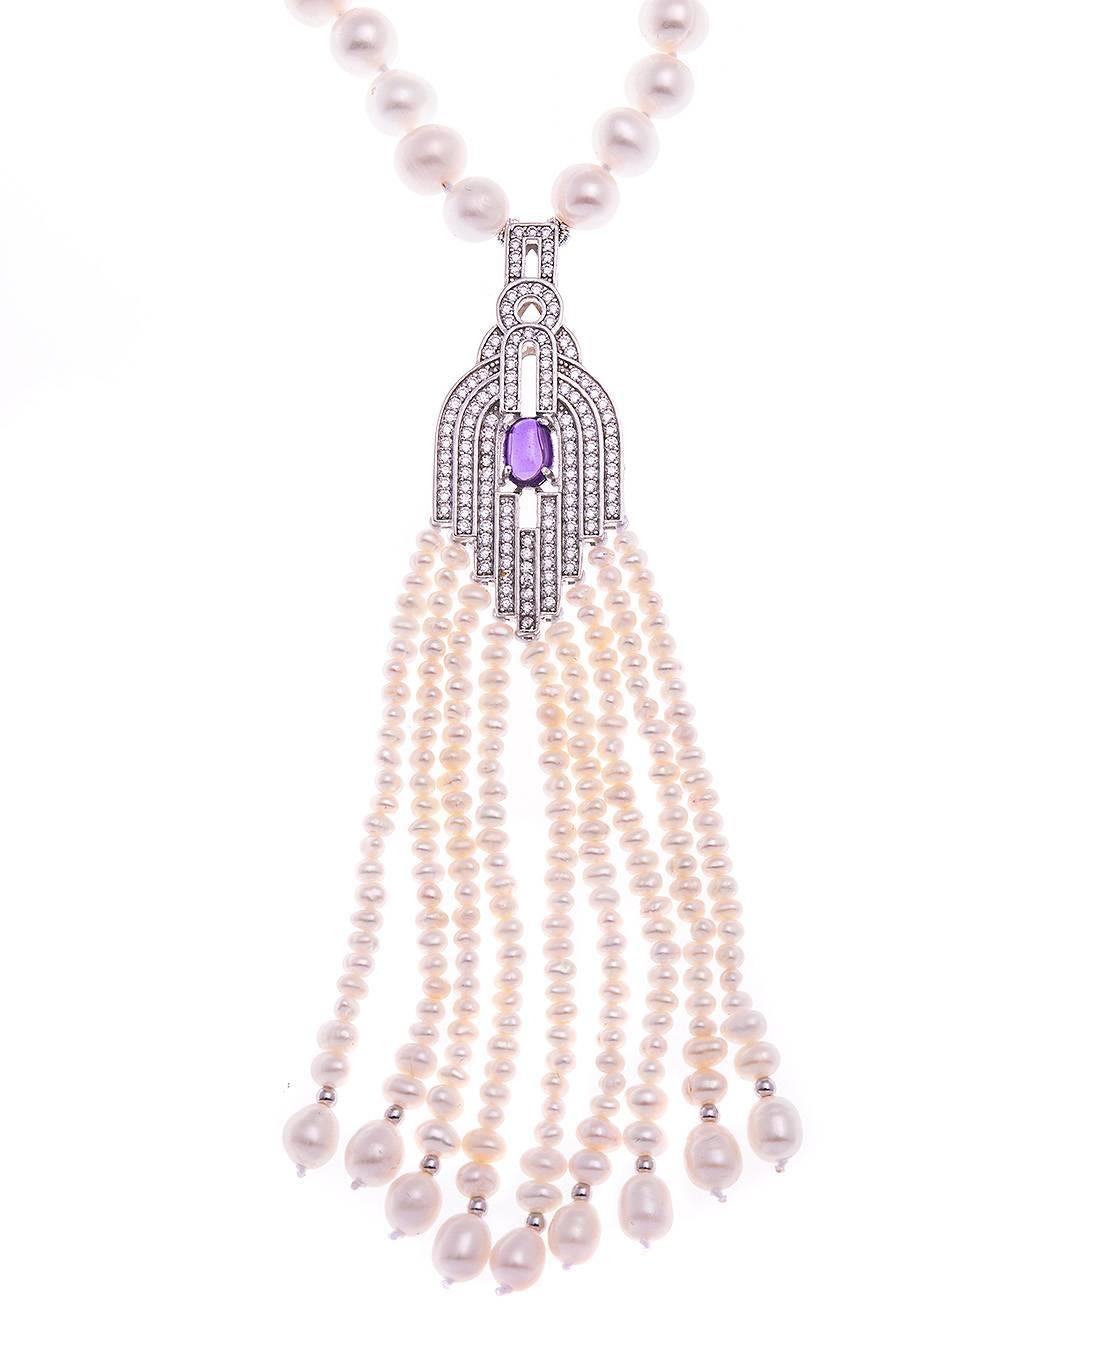 Take a step back in to the Roaring Twenties with this Great Gatsby inspired necklace. With over 32" over gleaming Freshwater pearls, all individually knotted and matched with inspiring perfection, this Opera length necklace can be worn down the